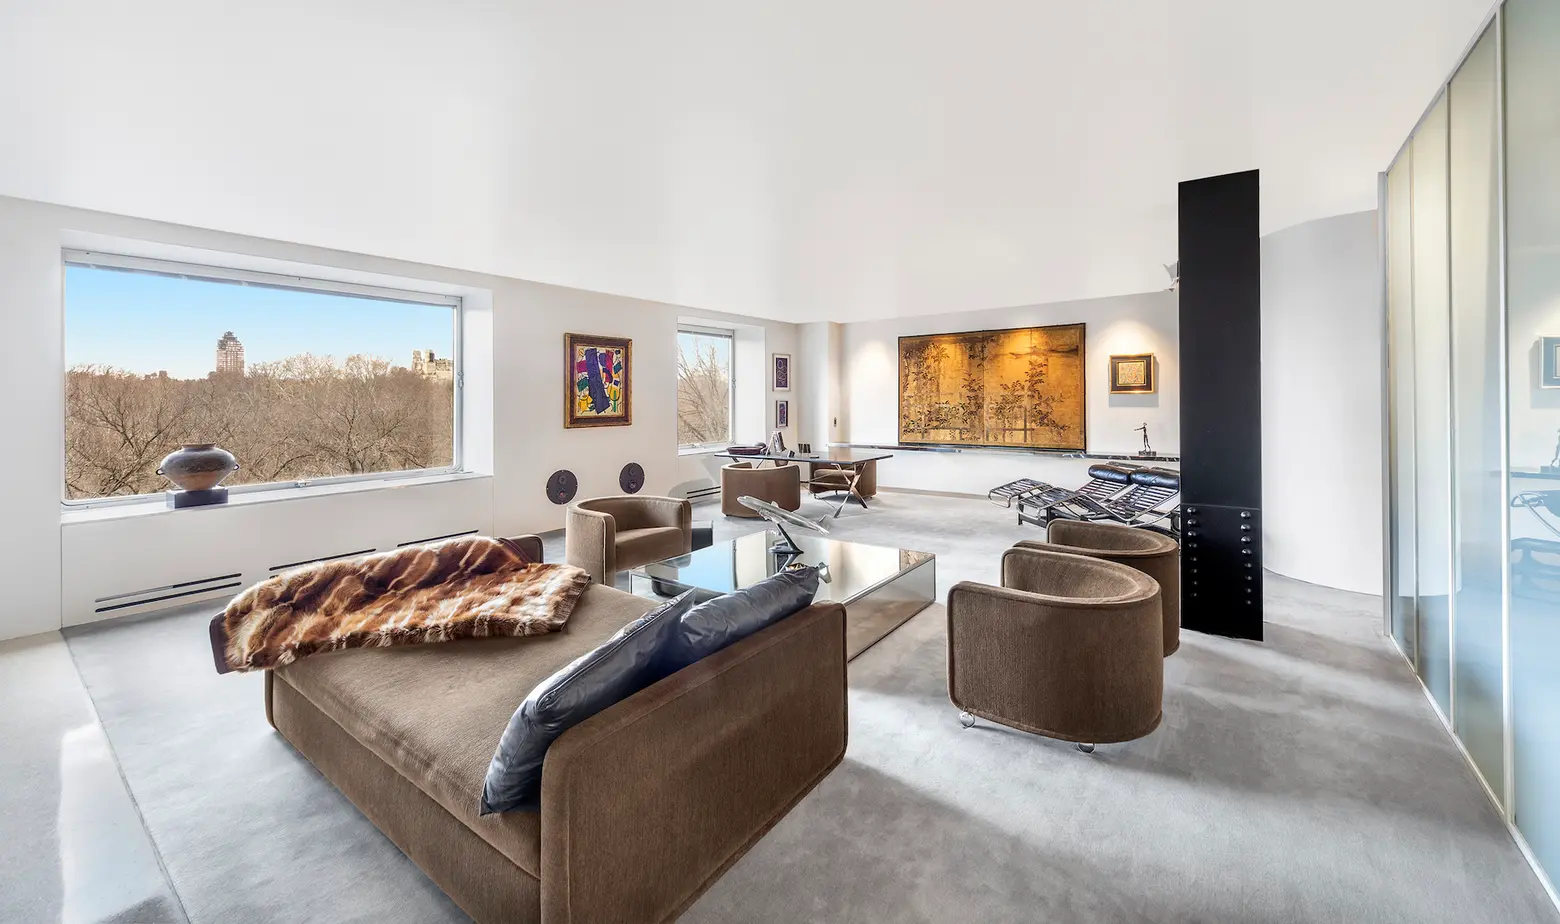 Modernist Upper East Side loft hits the market for the first time in 40 years for $4.9M